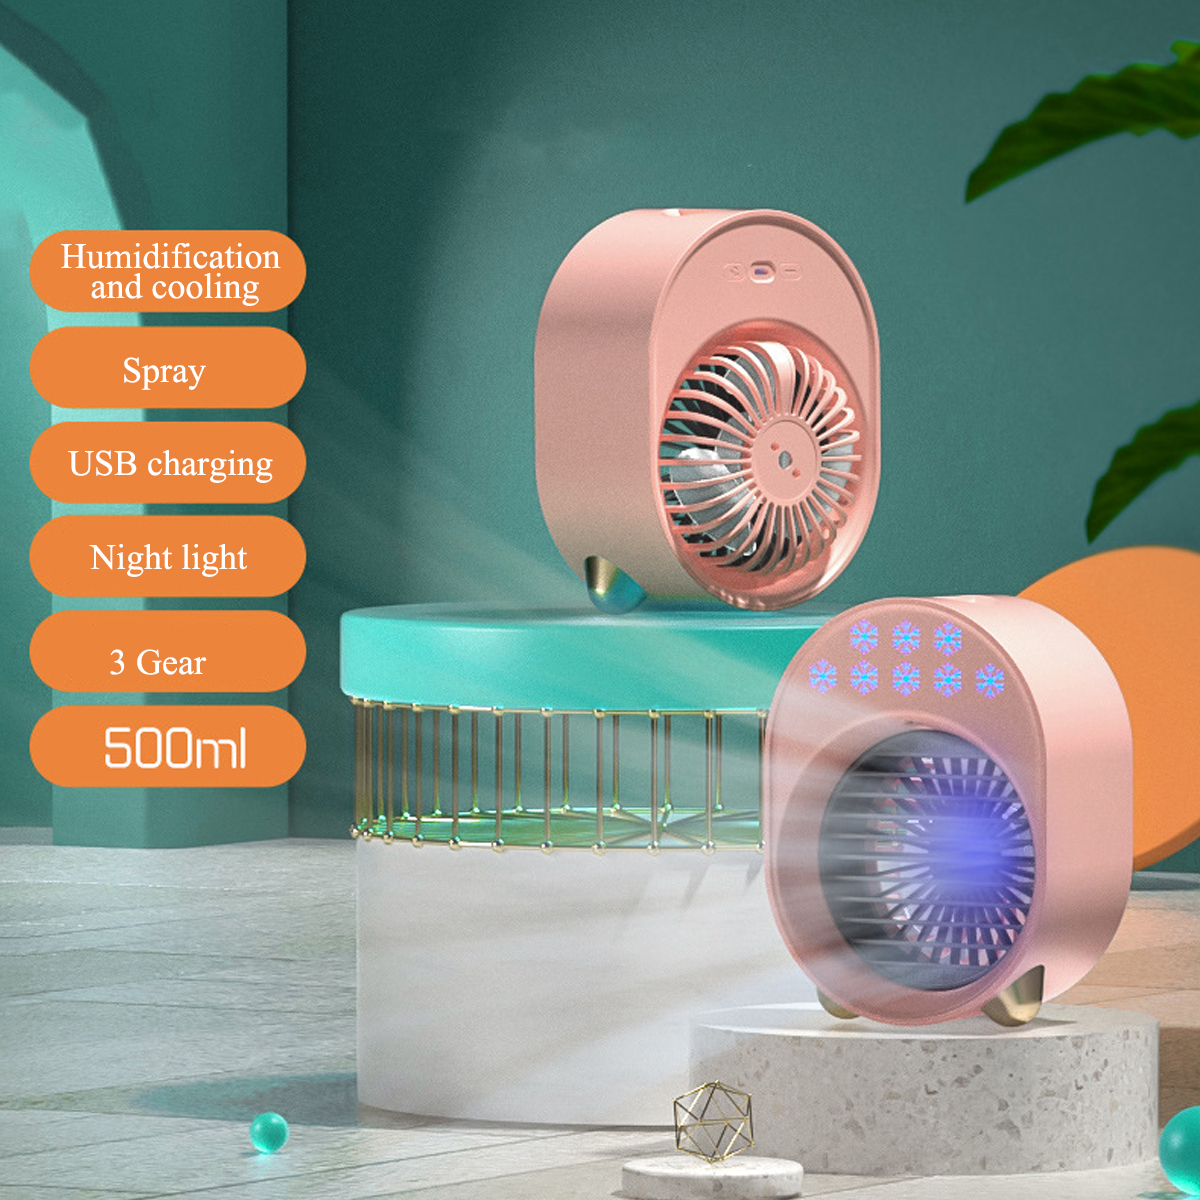 Bakeey-3-Gear-Mini-Water-Cooling-Fan-Spray-Humidification-Portable-Colorful-Night-Light-Air-Cooler-T-1838417-11